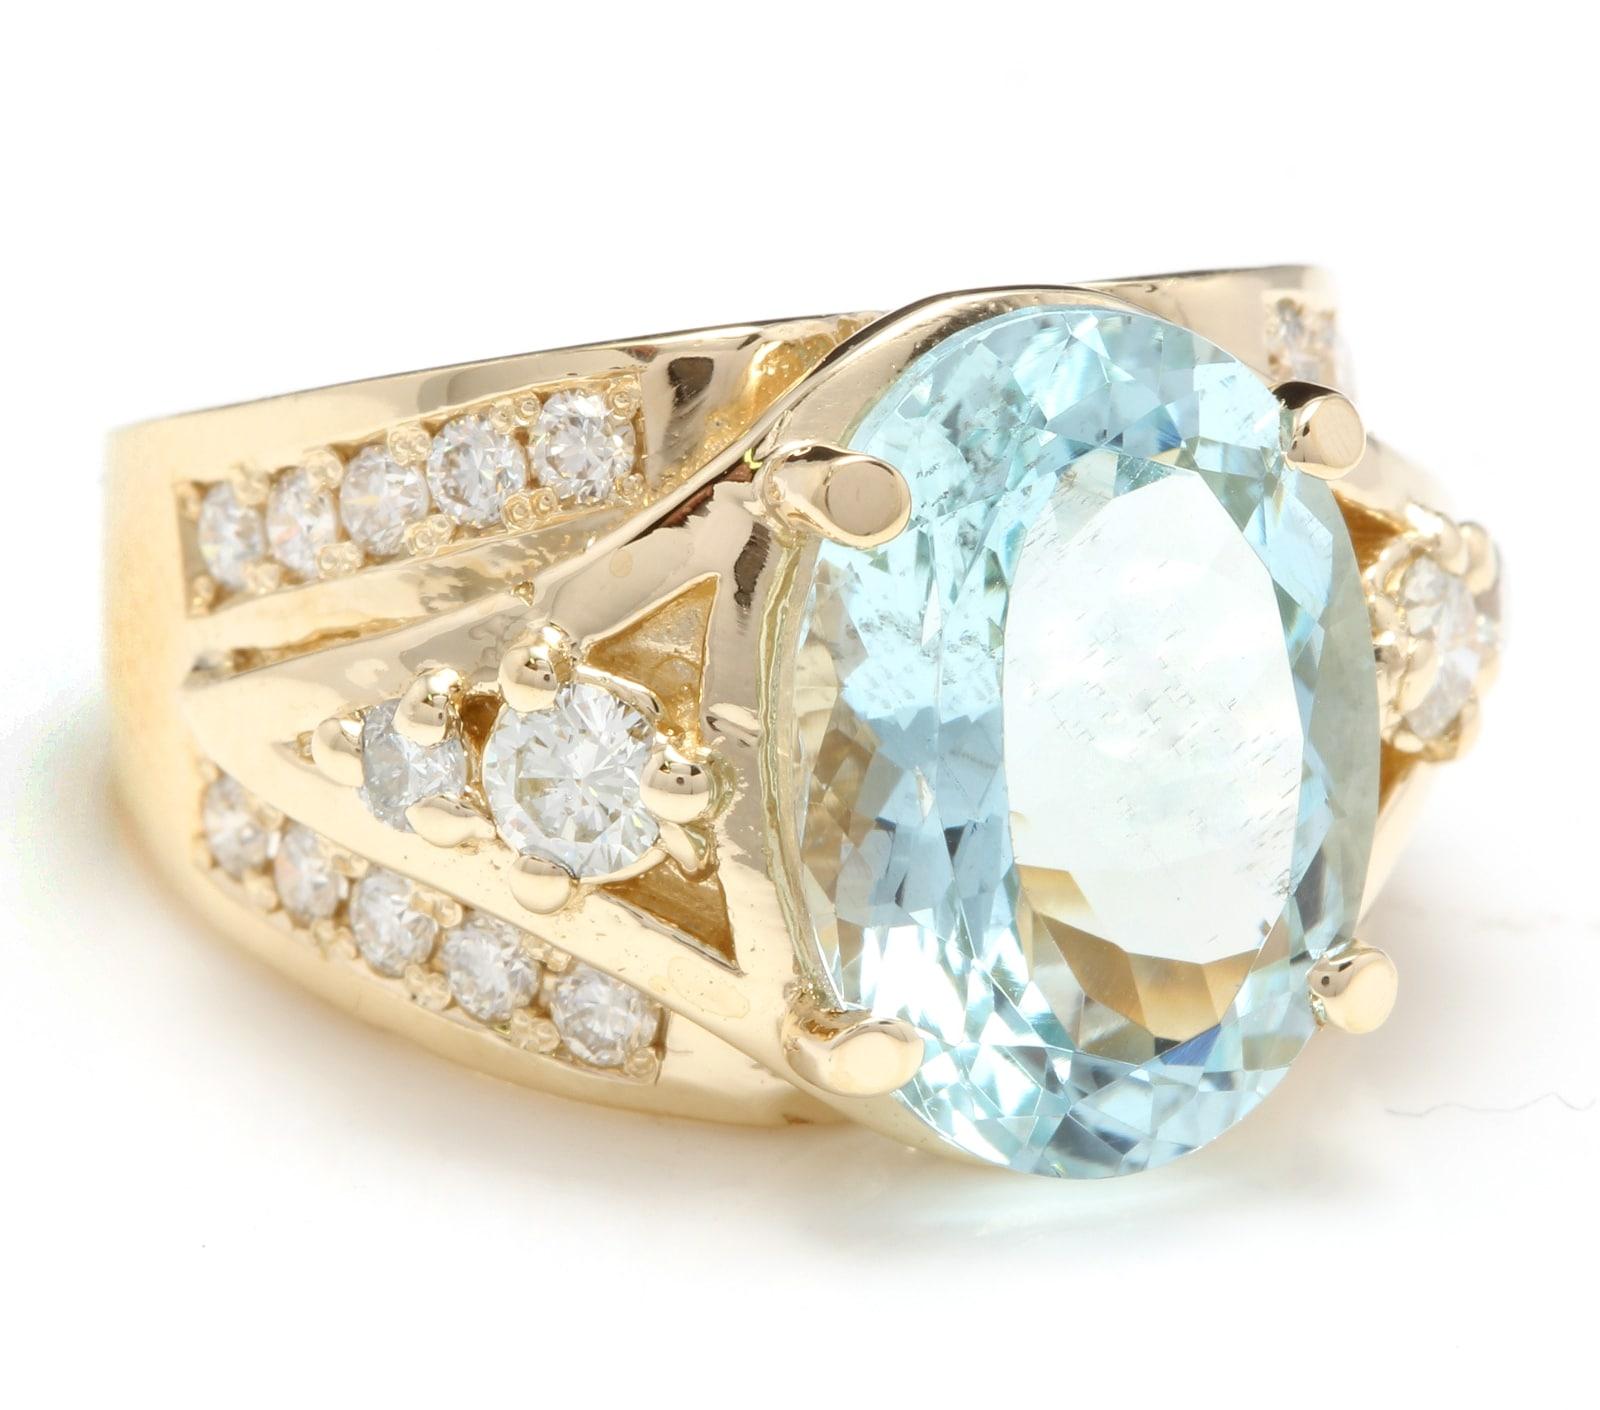 8.30 Carats Exquisite Natural Aquamarine and Diamond 18K Solid Yellow Gold Ring

Suggested Replacement Value: 8,000.00

Total Natural Aquamarine Weight is: Approx. 7.00 Carats 

Aquamarine Measures: Approx. 14.12 x 10.80mm

Natural Round Diamonds